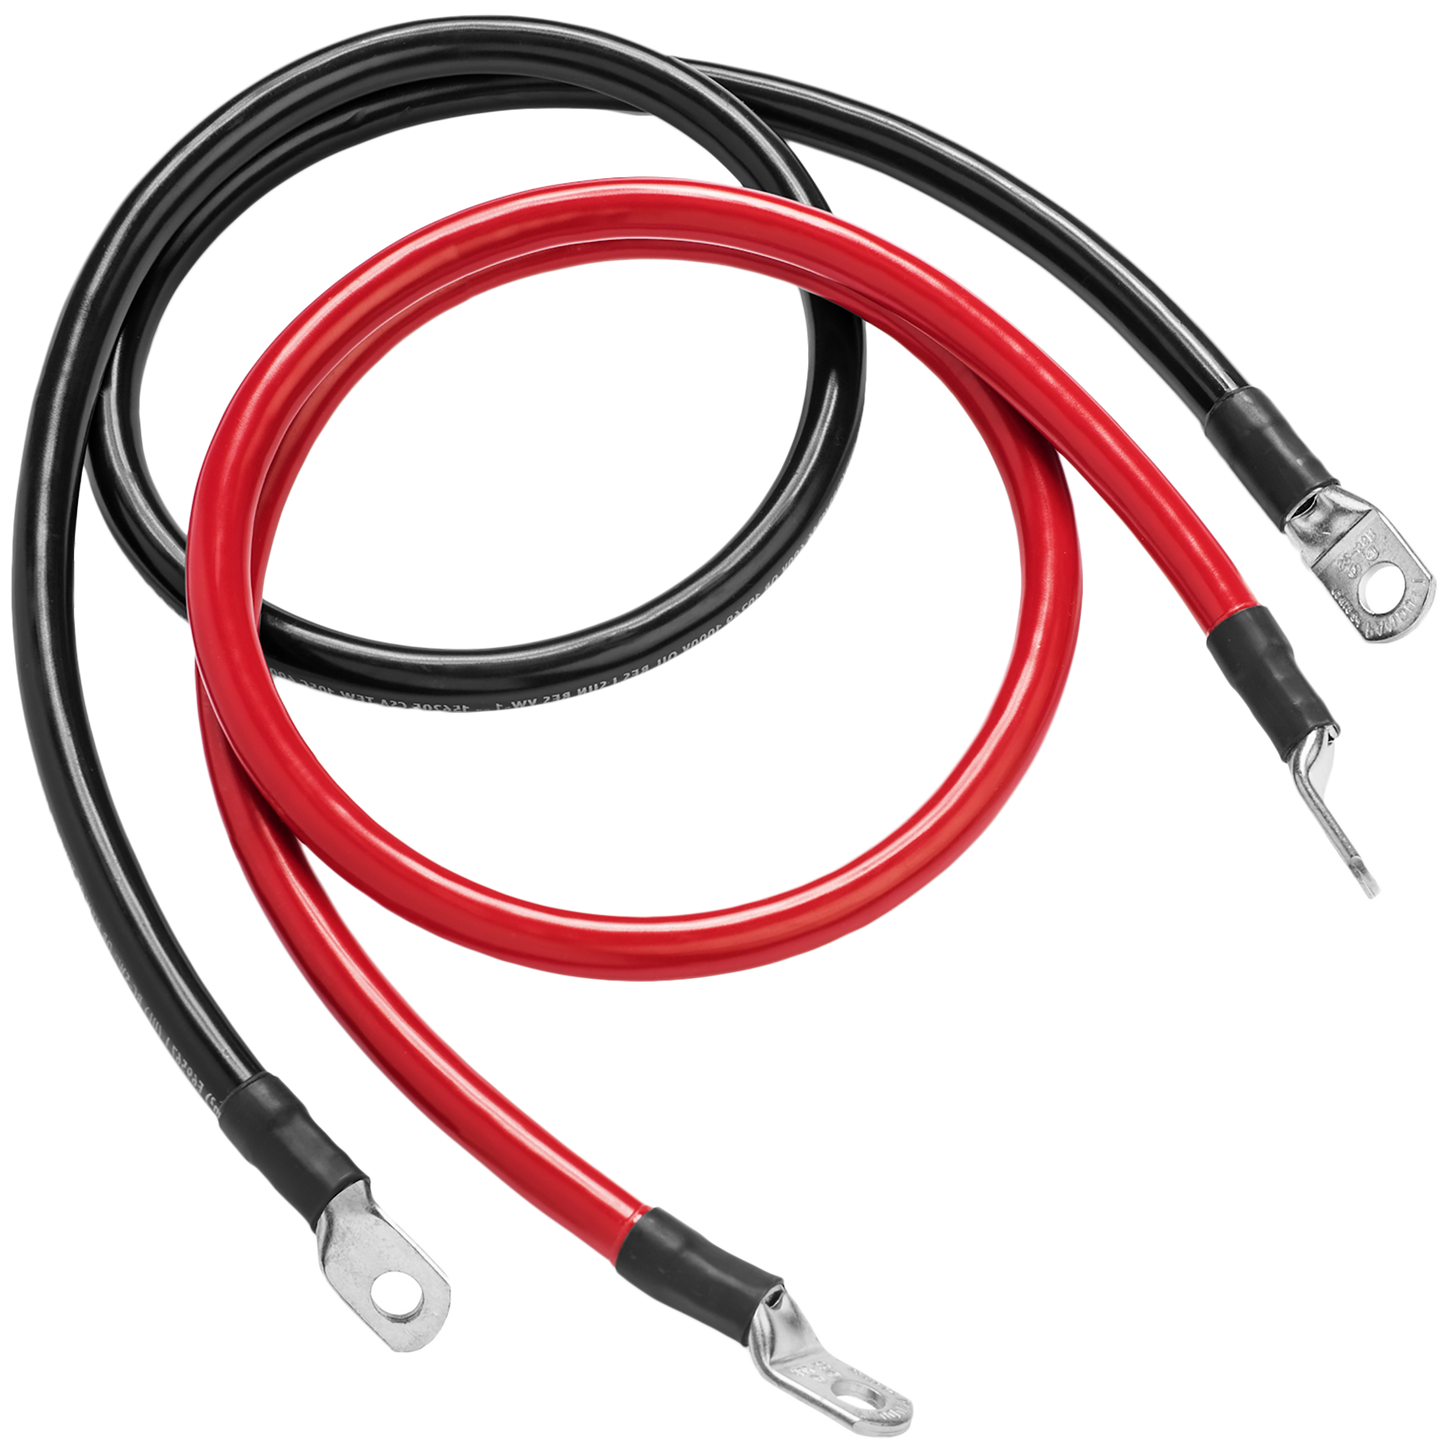 Battery Cable Kit Red/Black - 48 inch